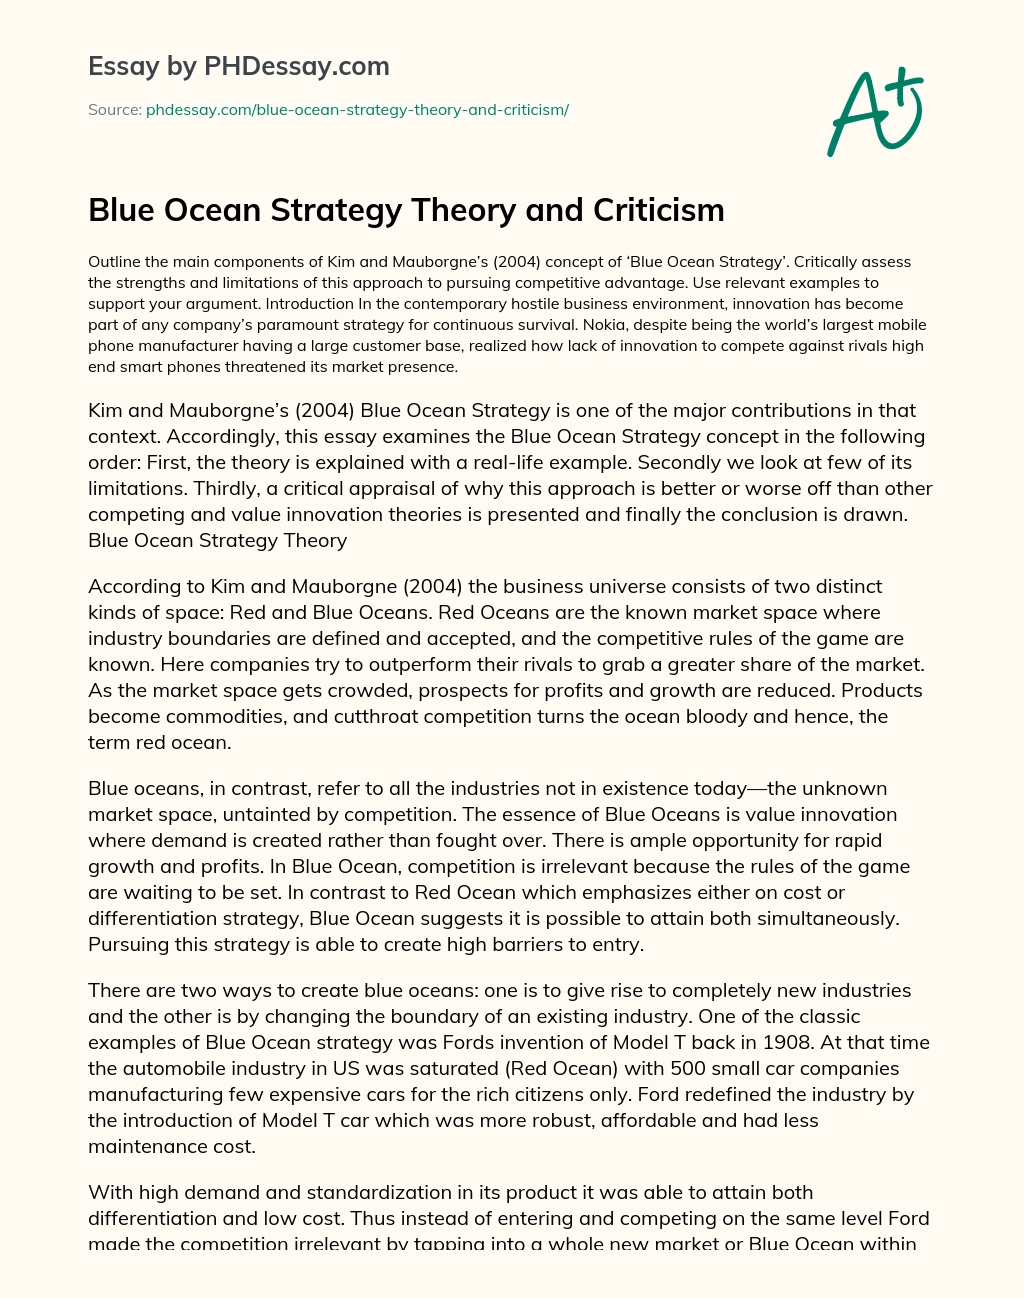 Blue Ocean Strategy Theory and Criticism essay